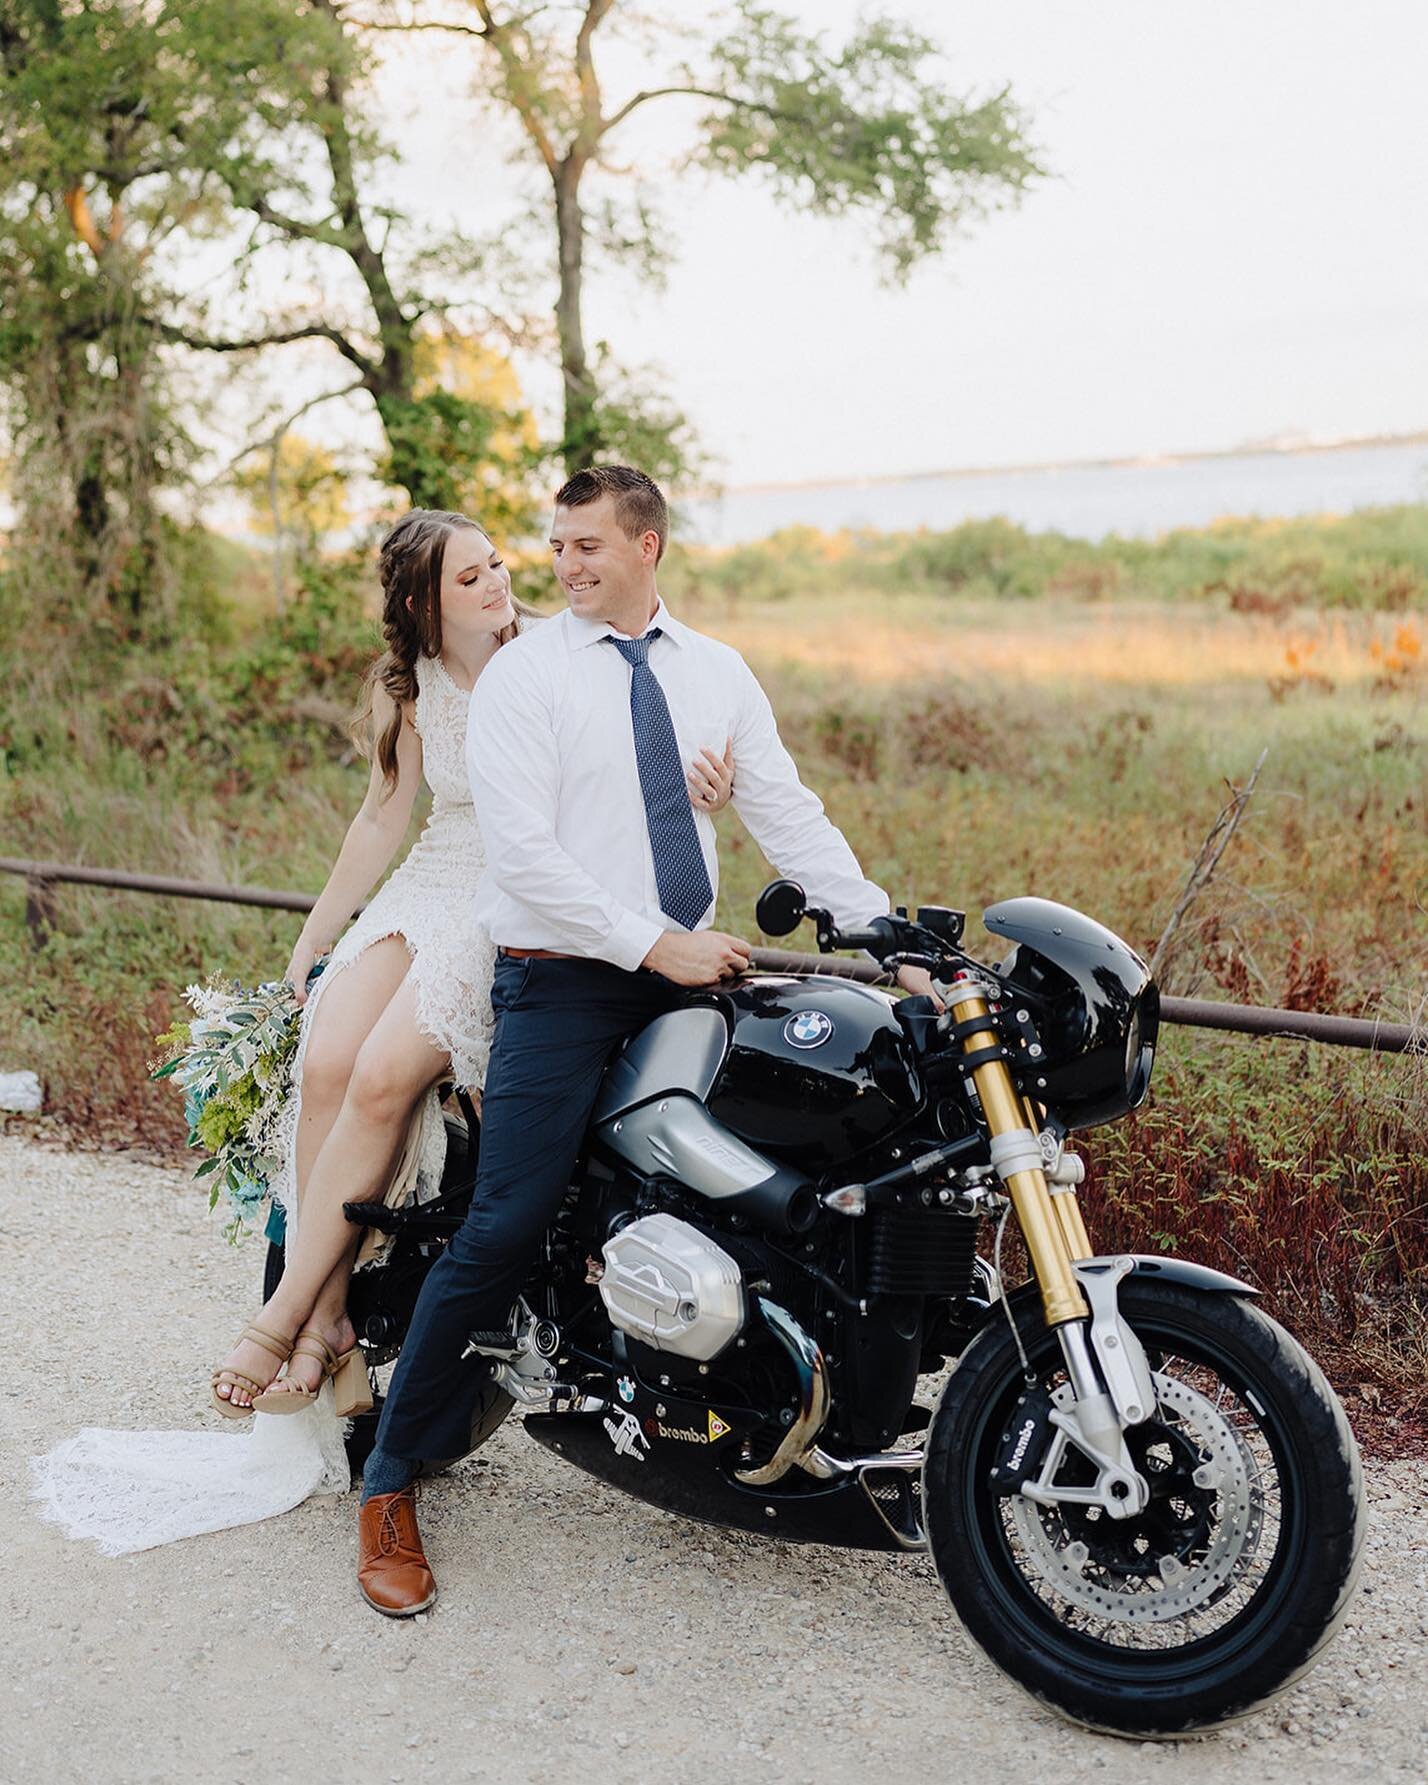 Why not choose a motorcycle as your getaway car when driving off into the sunset! 🏍️✨

Shoutout to @evancarpenterphotography for creating magic that day! These photos turned out amazing!🤍